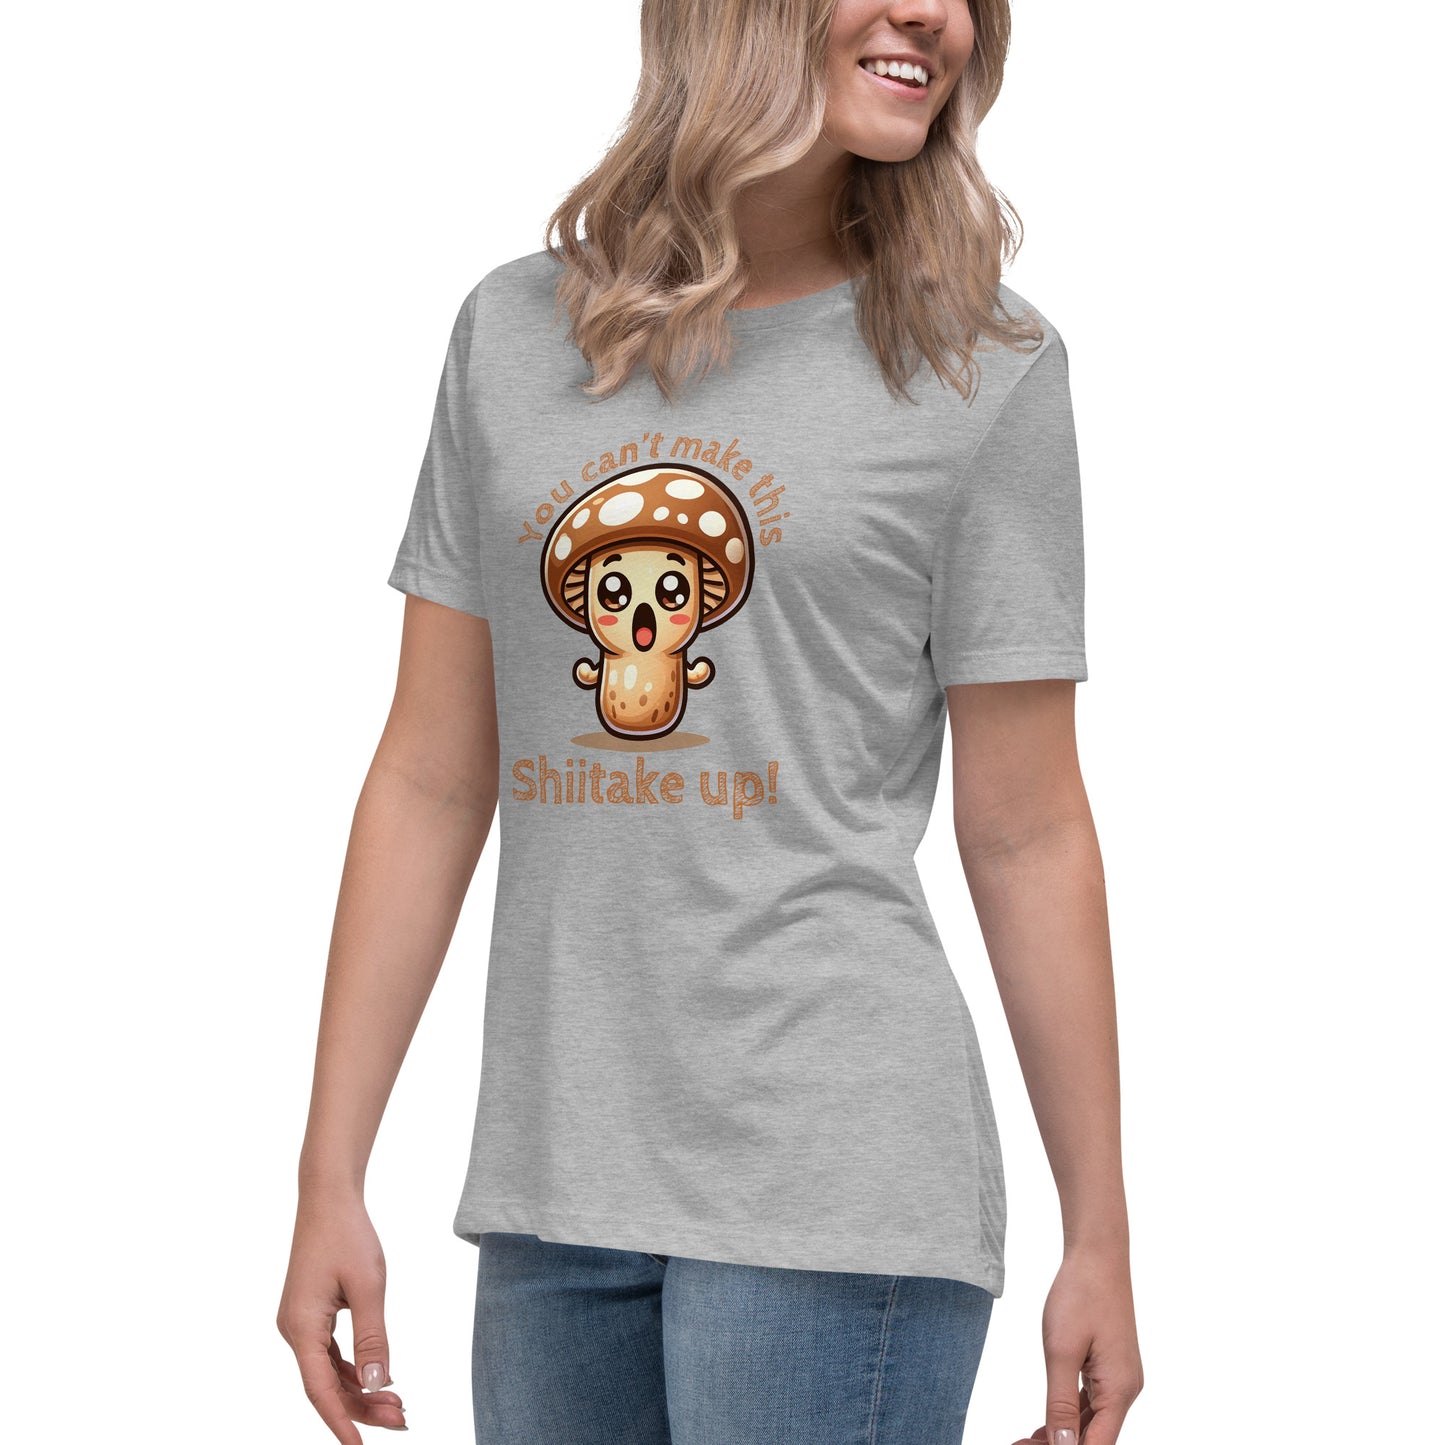 You Can't Make This Shiitake Up - Women's Relaxed T-Shirt